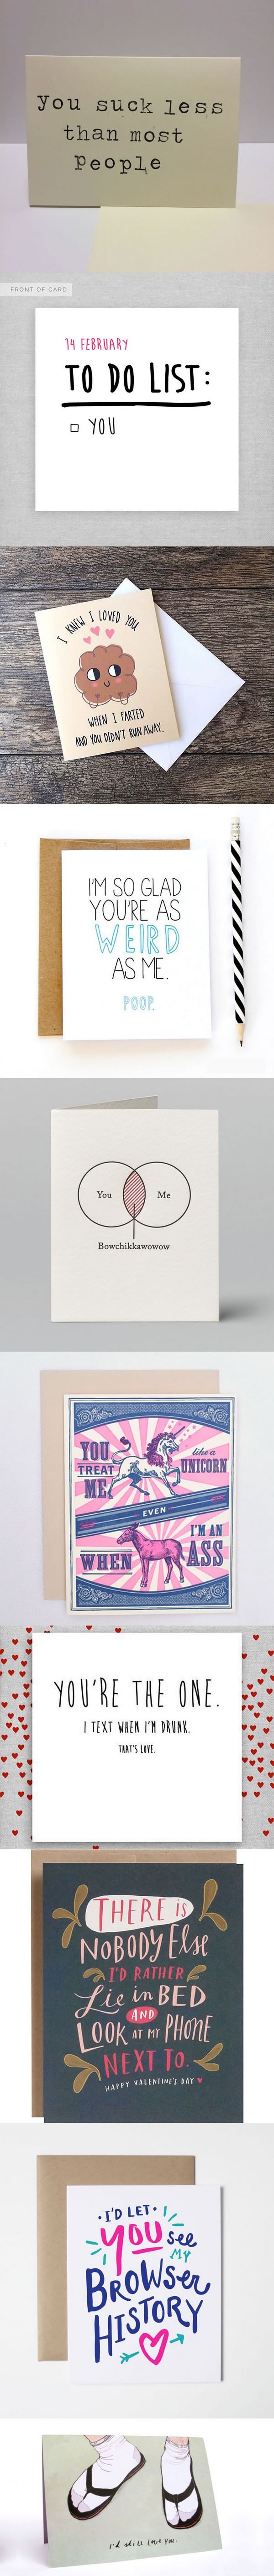 unconventional-valentines-day-cards